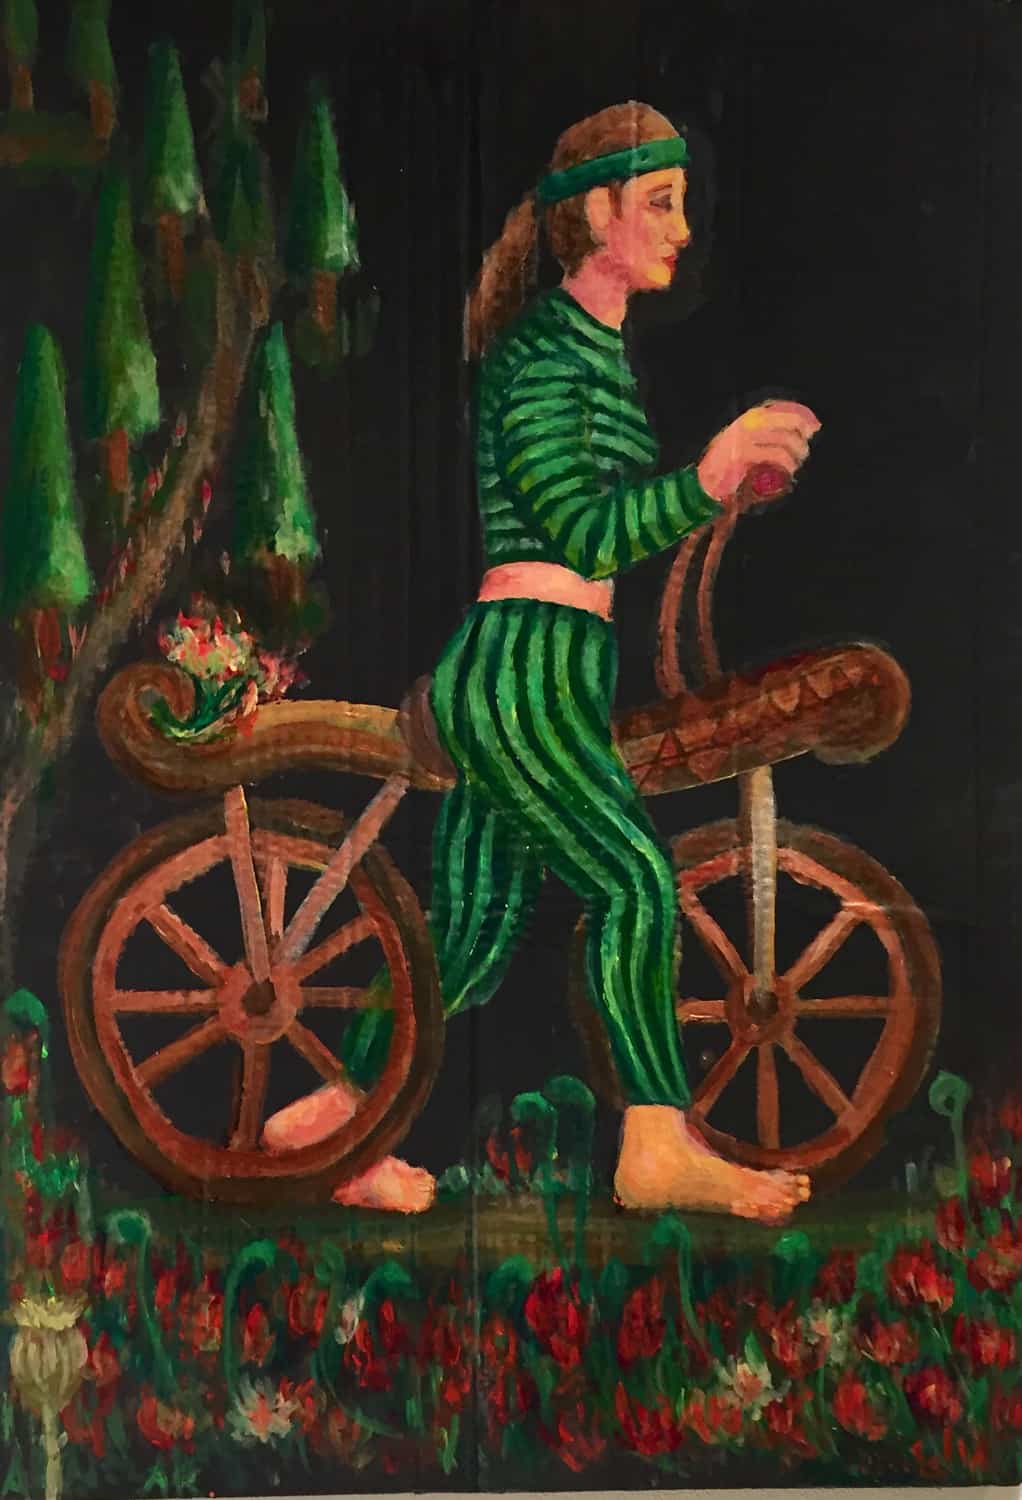 woman in striped black and green outfit riding a large wooden hobby horse in a poppy field